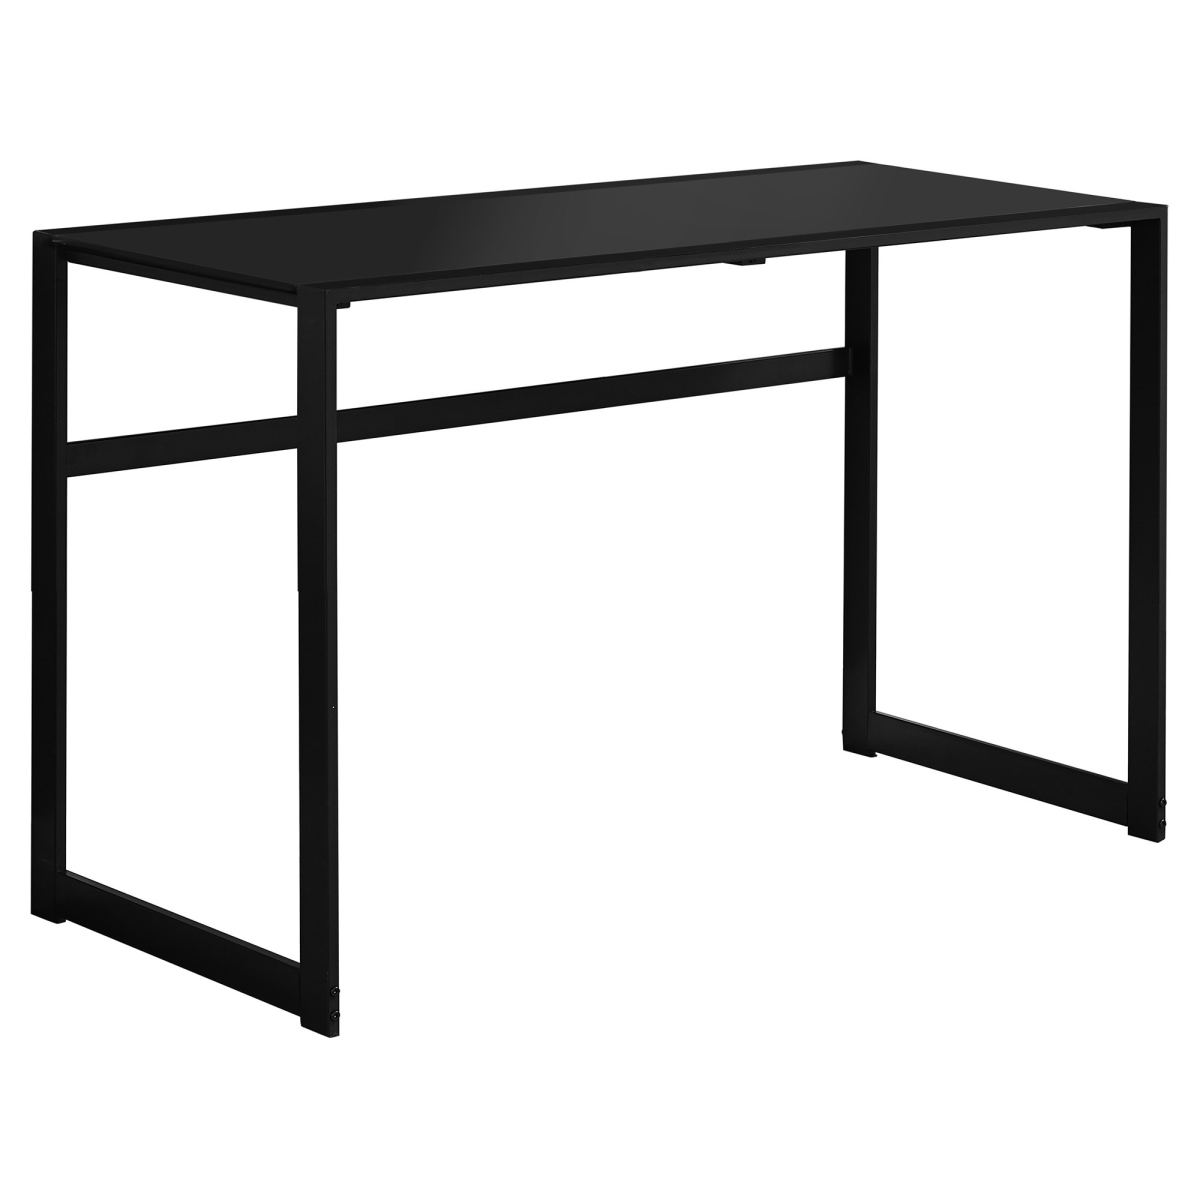 Picture of Monarch Specialties I 7379 48 in. Black Metal Tempered Glass Computer Desk